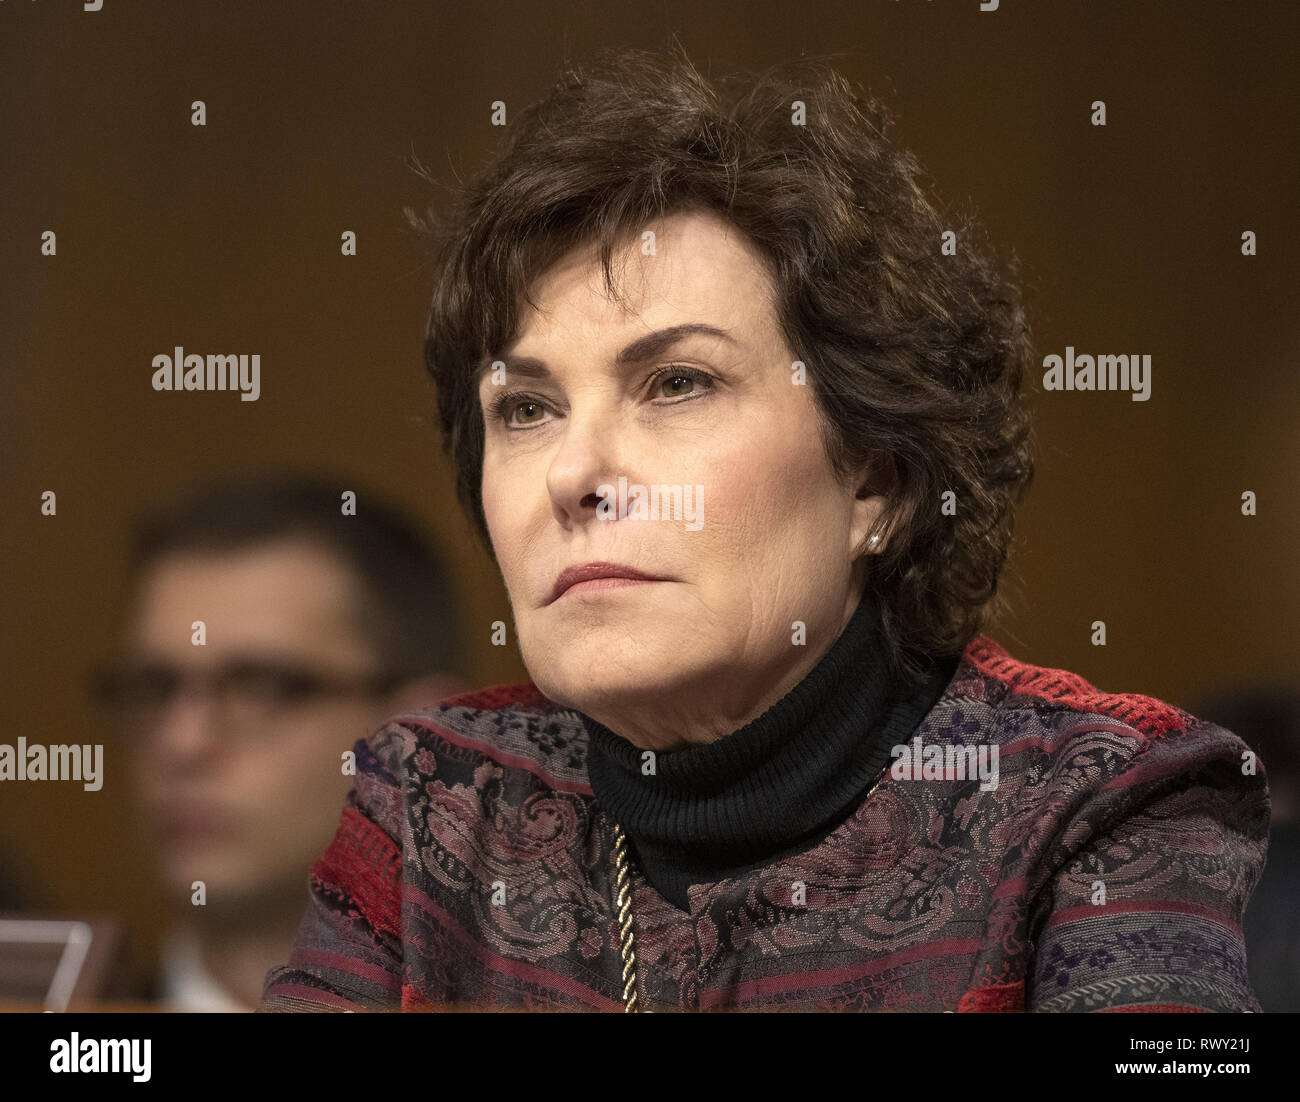 Washington, District of Columbia, USA. 7th Mar, 2019. United States Senator Jacky Rosen (Democrat of Nevada) listens to the testimony before the US Senate Committee on Homeland Security and Governmental Affairs Permanent Subcommittee on Investigations during a hearing on ''Examining Private Sector Data Breaches'' on Capitol Hill in Washington, DC on Thursday, March 7, 2019 Credit: ZUMA Press, Inc./Alamy Live News Stock Photo